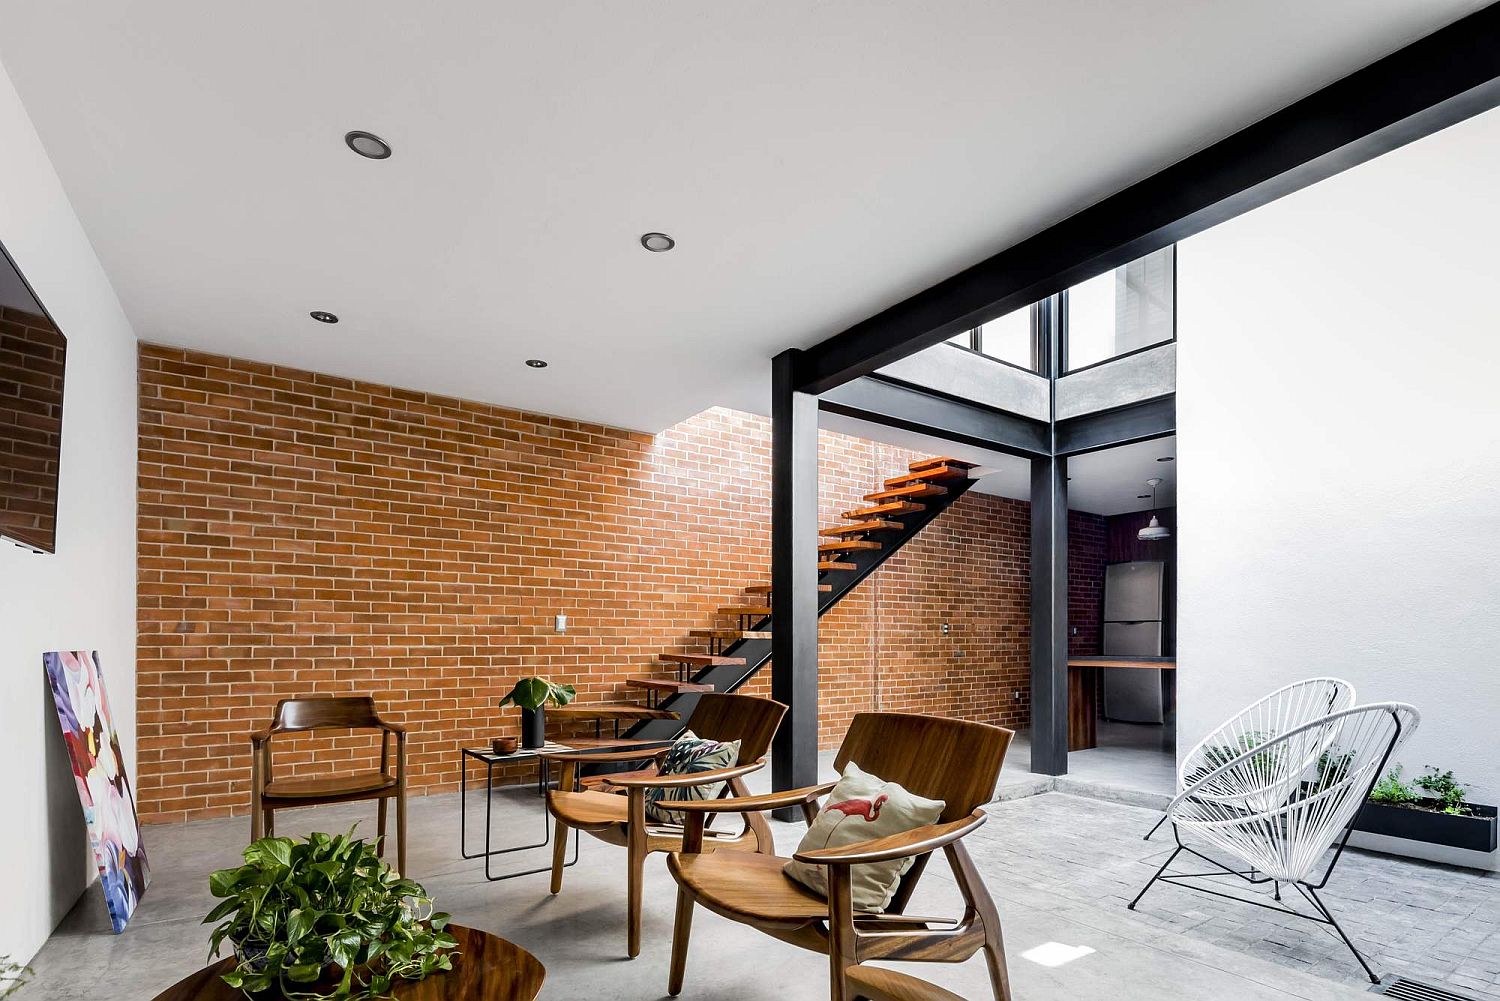 Brick wall brings unique textural element to the living room